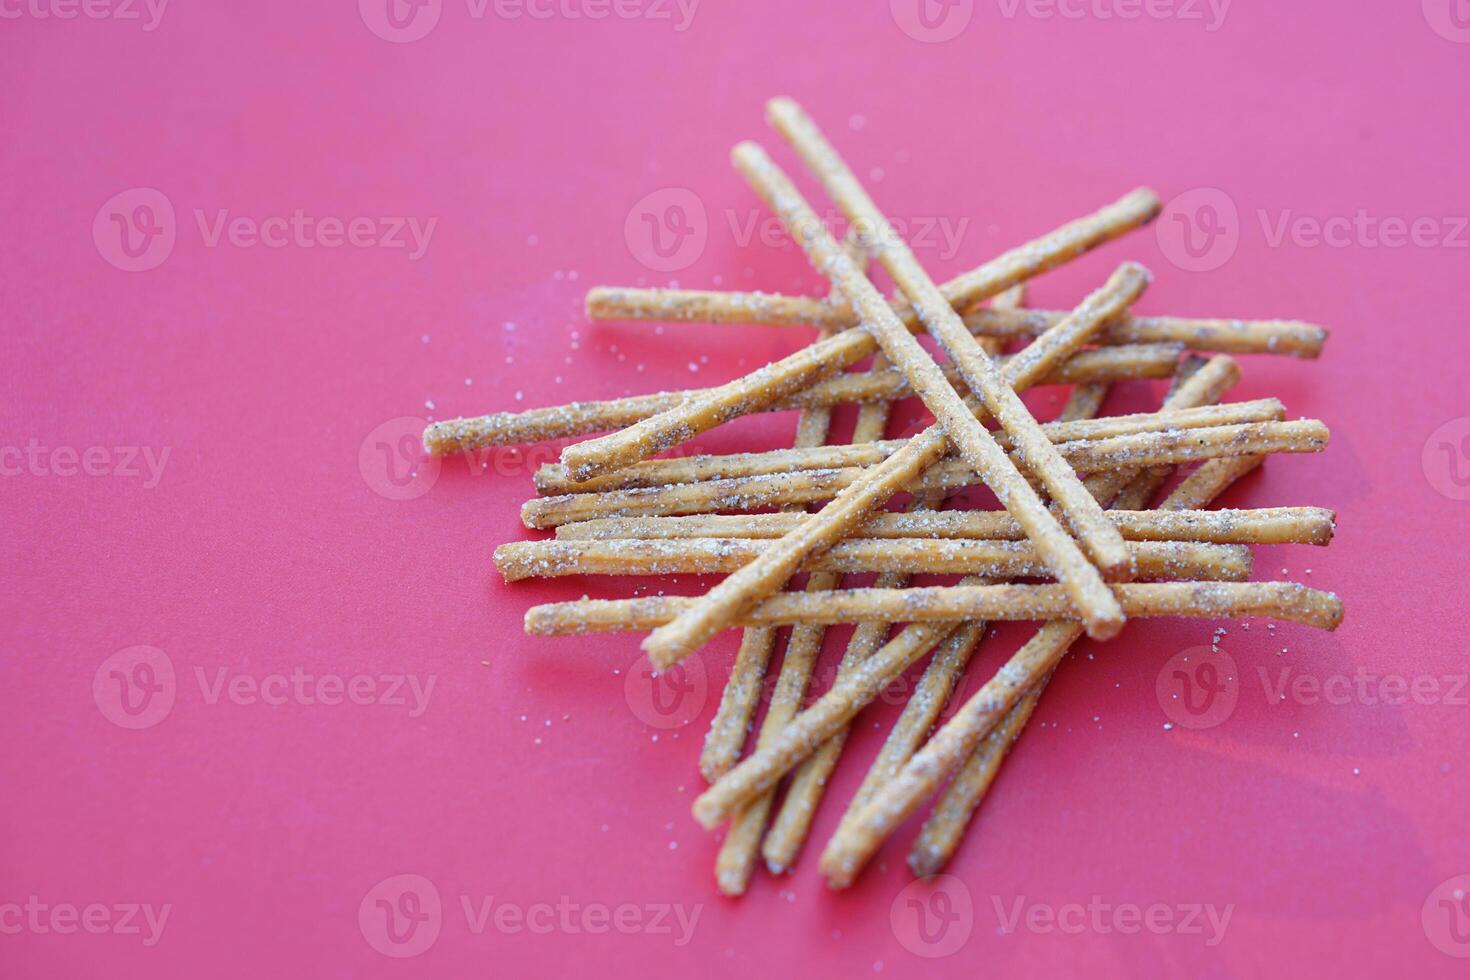 Crunchy salty and spicy flavored pretzel sticks, breadsticks, snacks on red background. Concept, junk food, appetizer. photo